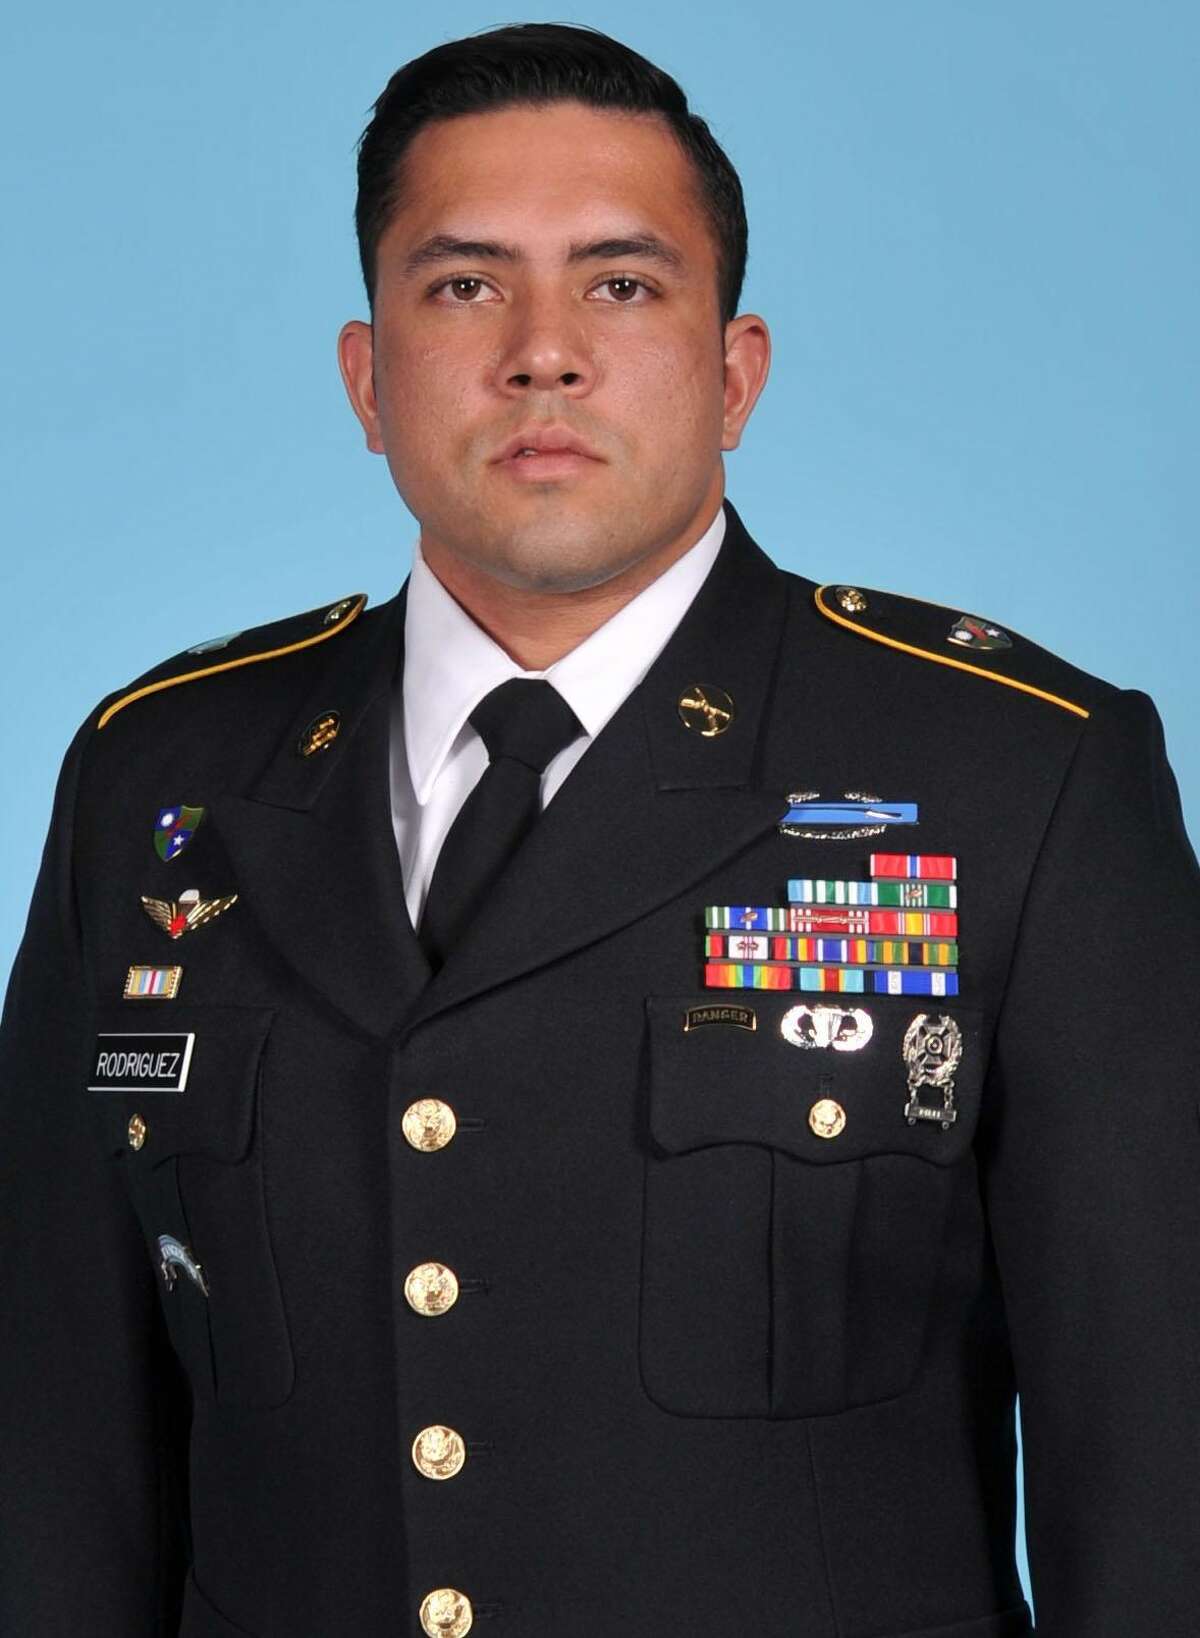 Sgt. 1st Class Antonio R. Rodriguez, 28, of Las Cruces, New Mexico, died February 8, from wounds sustained during combat operations in Nangarhar Province, Afghanistan.